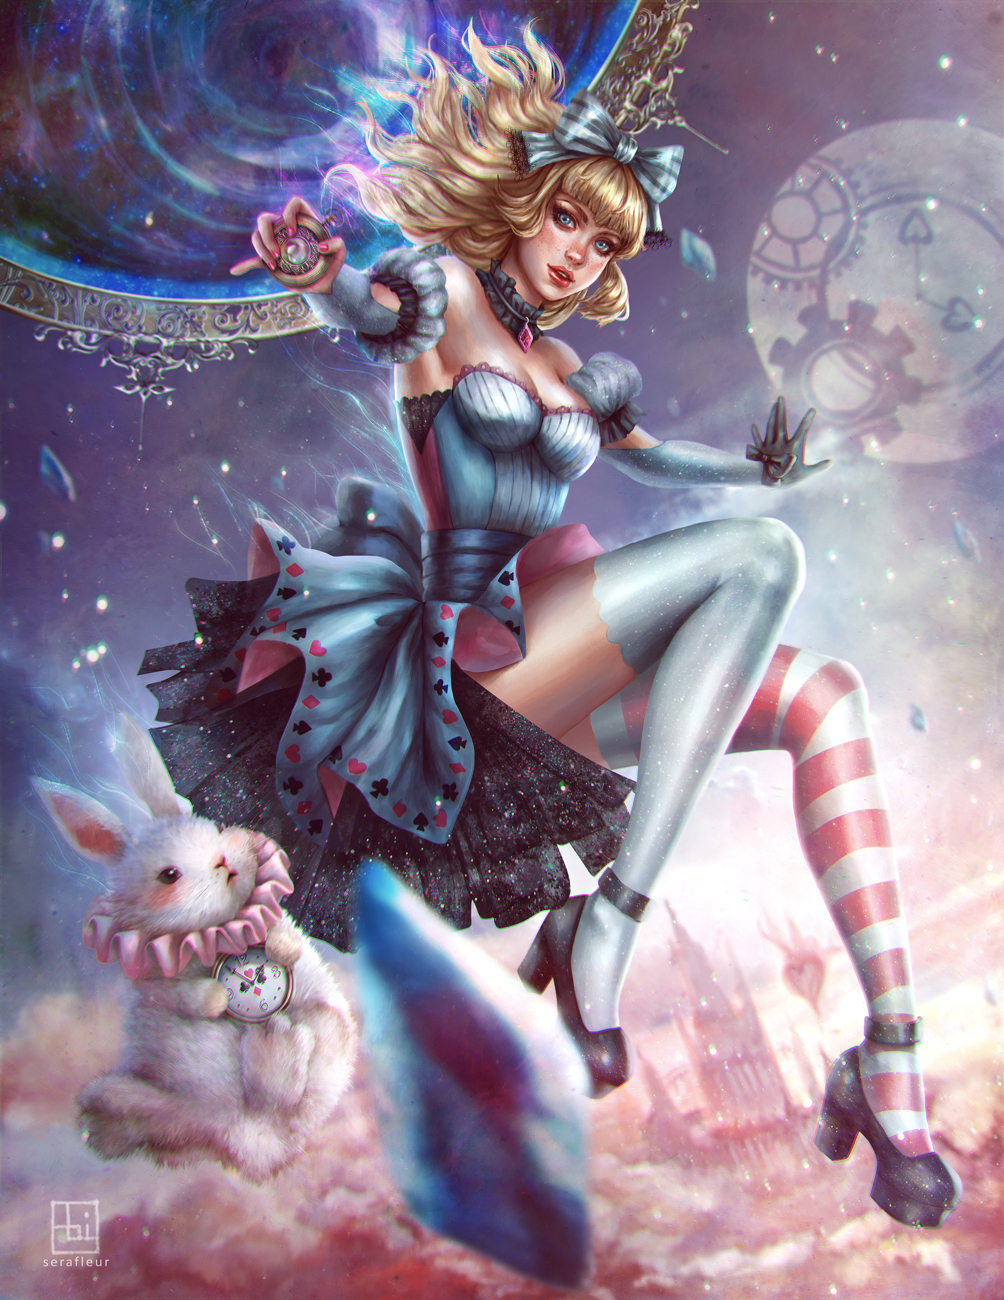 1girl abigail_diaz alice_(wonderland) alice_in_wonderland analog_clock artist_name black_shoes blue_bow blue_eyes bow breasts clock clubs_(playing_card) diamonds_(playing_card) dress freckles full_body gem hearts_(playing_card) high_heels highres horizontal_stripes lips long_hair looking_at_viewer medium_breasts mismatched_legwear nail_polish nose pink_nails red_lips sash shoes solo spades_(playing_card) strapless strapless_dress striped striped_bow striped_legwear thigh-highs white_legwear white_rabbit